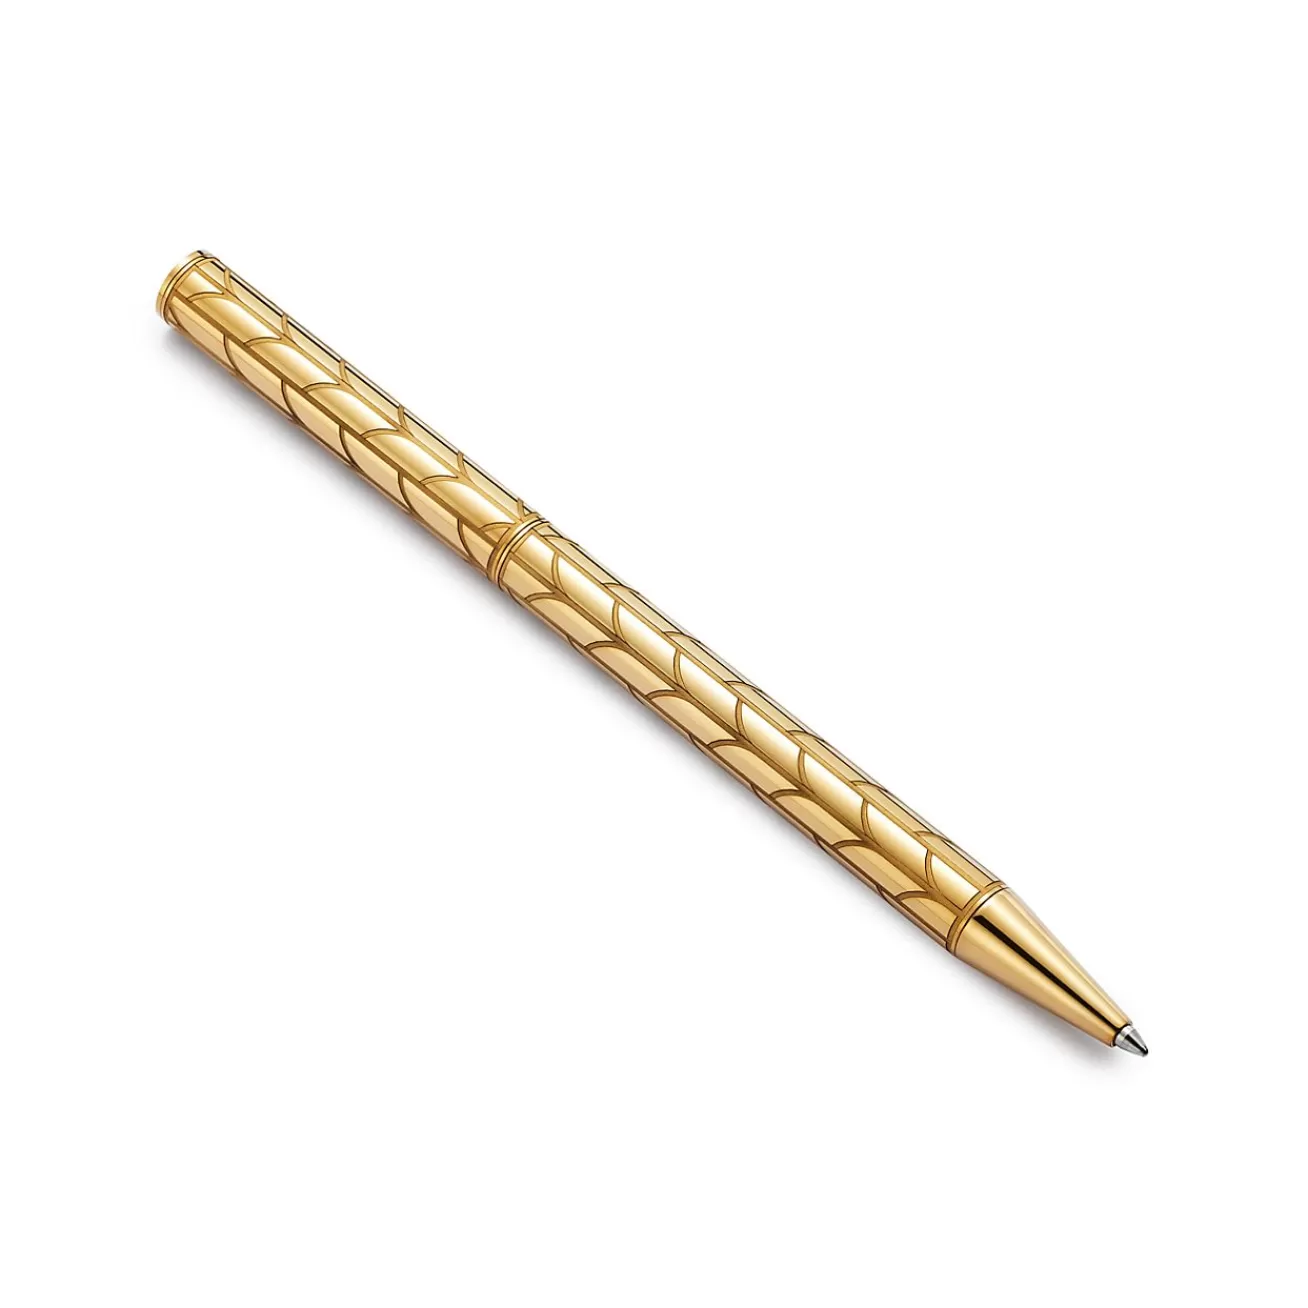 Tiffany & Co. Wheat Leaf Ballpoint Pen in Gold Vermeil | ^ Stationery, Games & Unique Objects | Games & Novelties